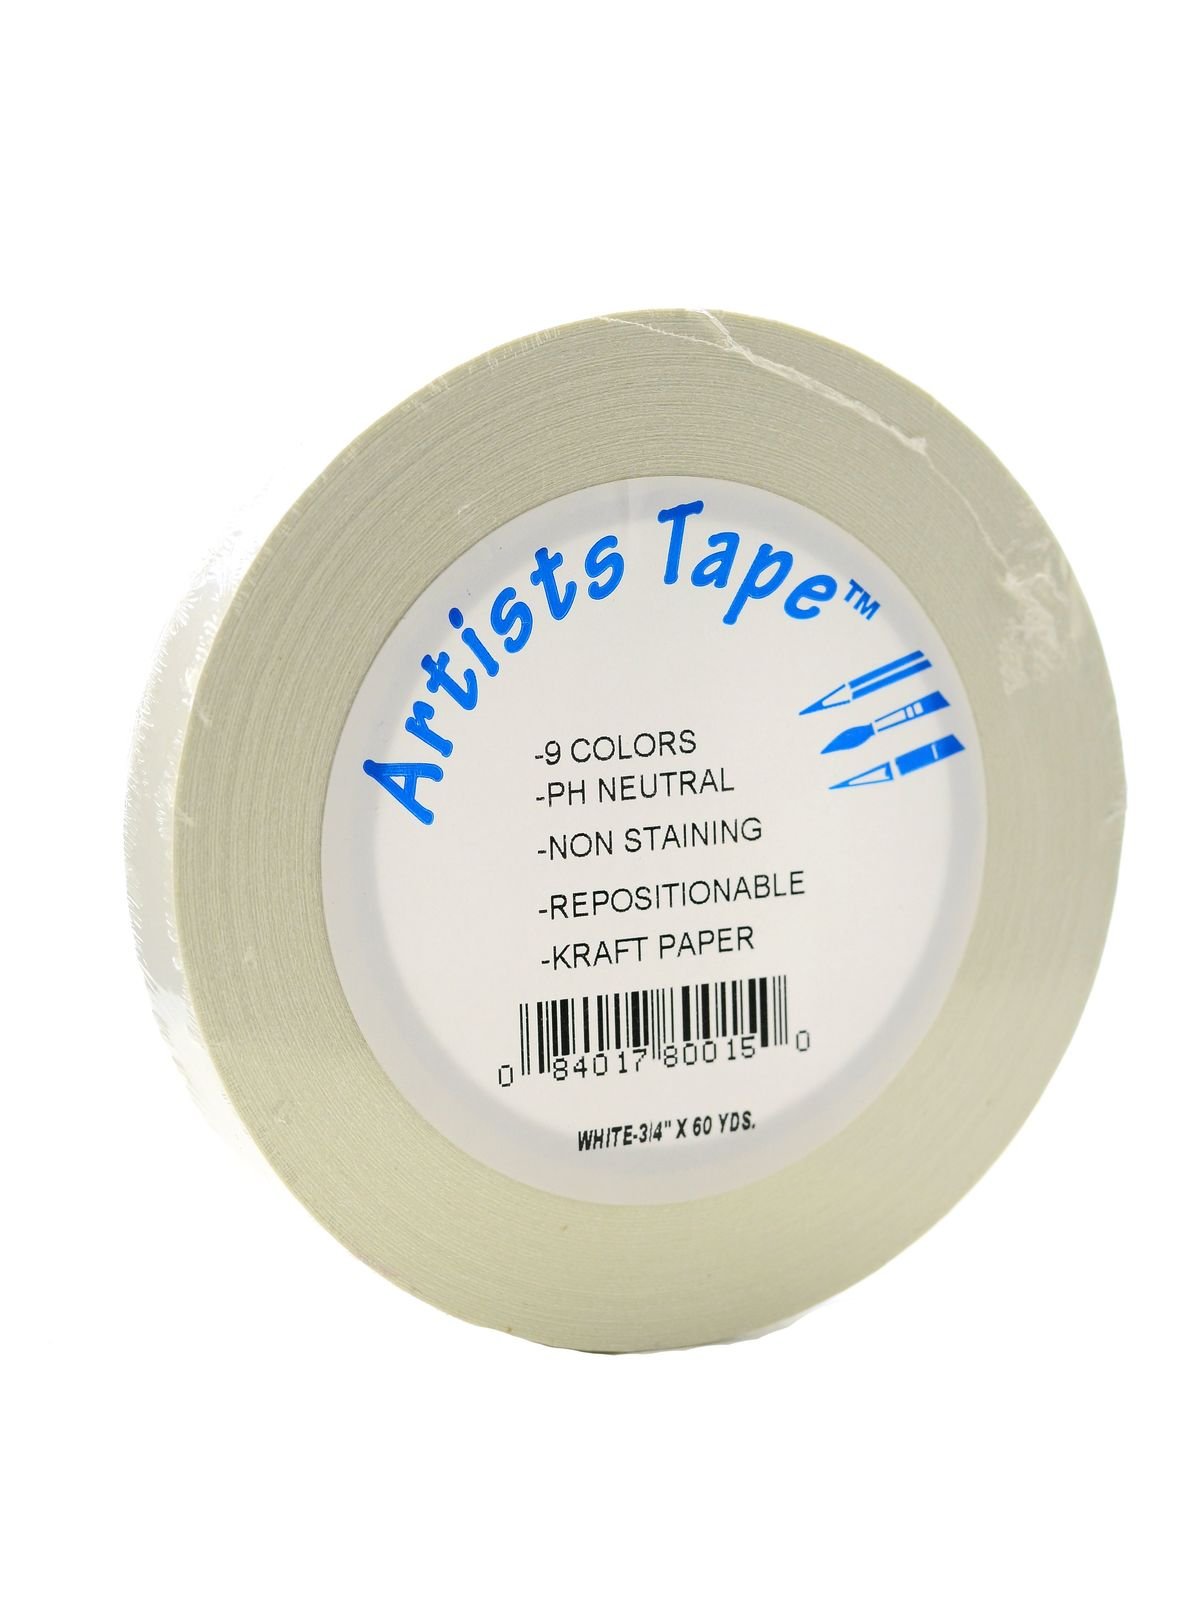 Pro Tapes® Artist's Tapes – Opus Art Supplies